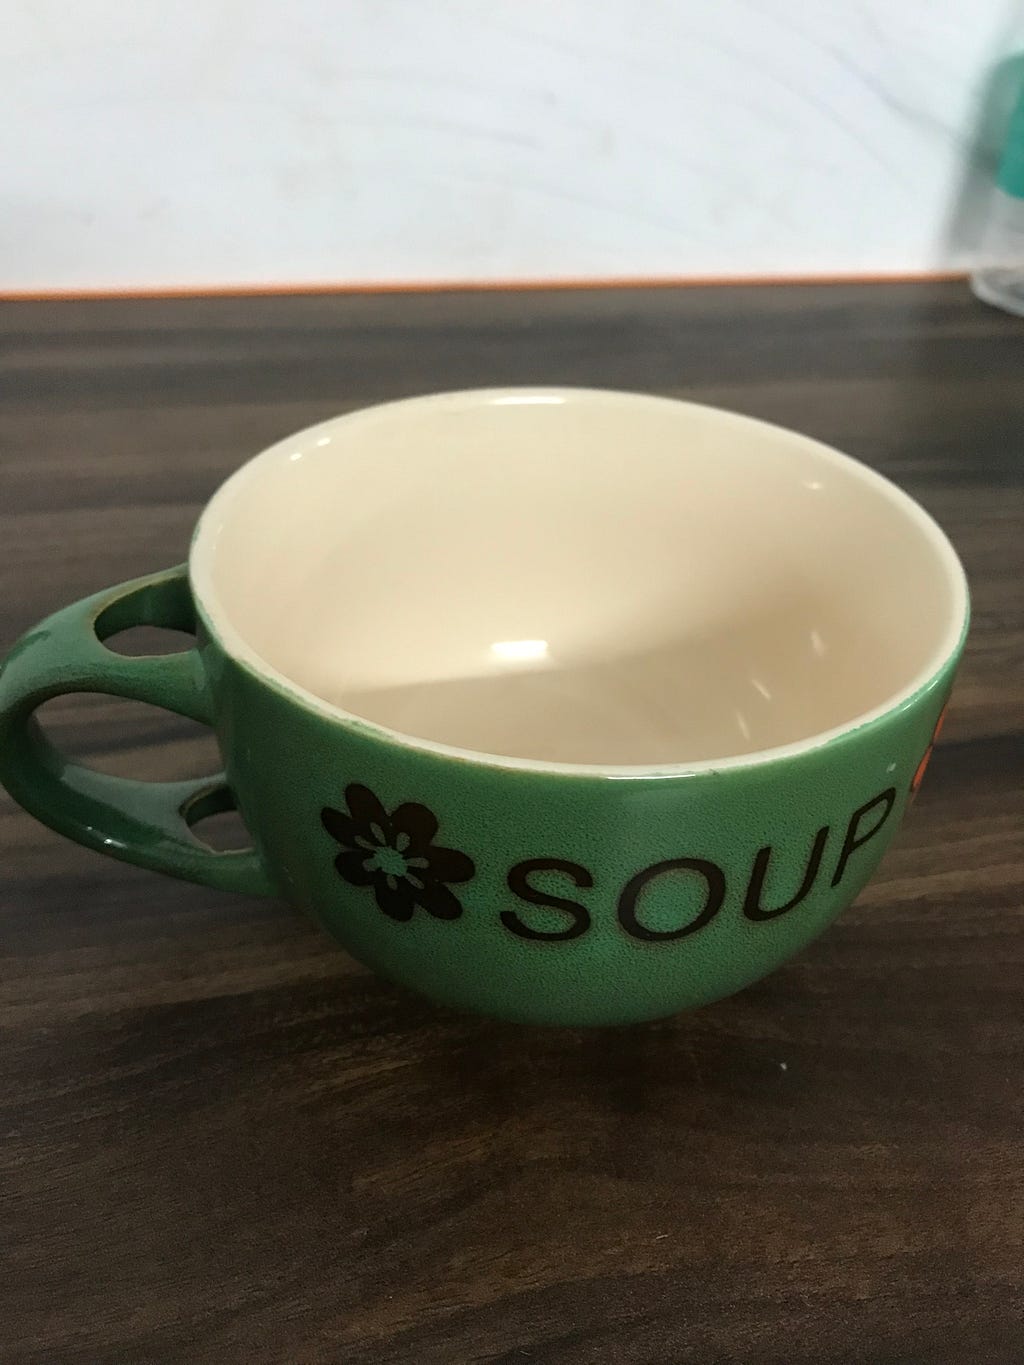 A bowl with a side handle to hold it as a cup.